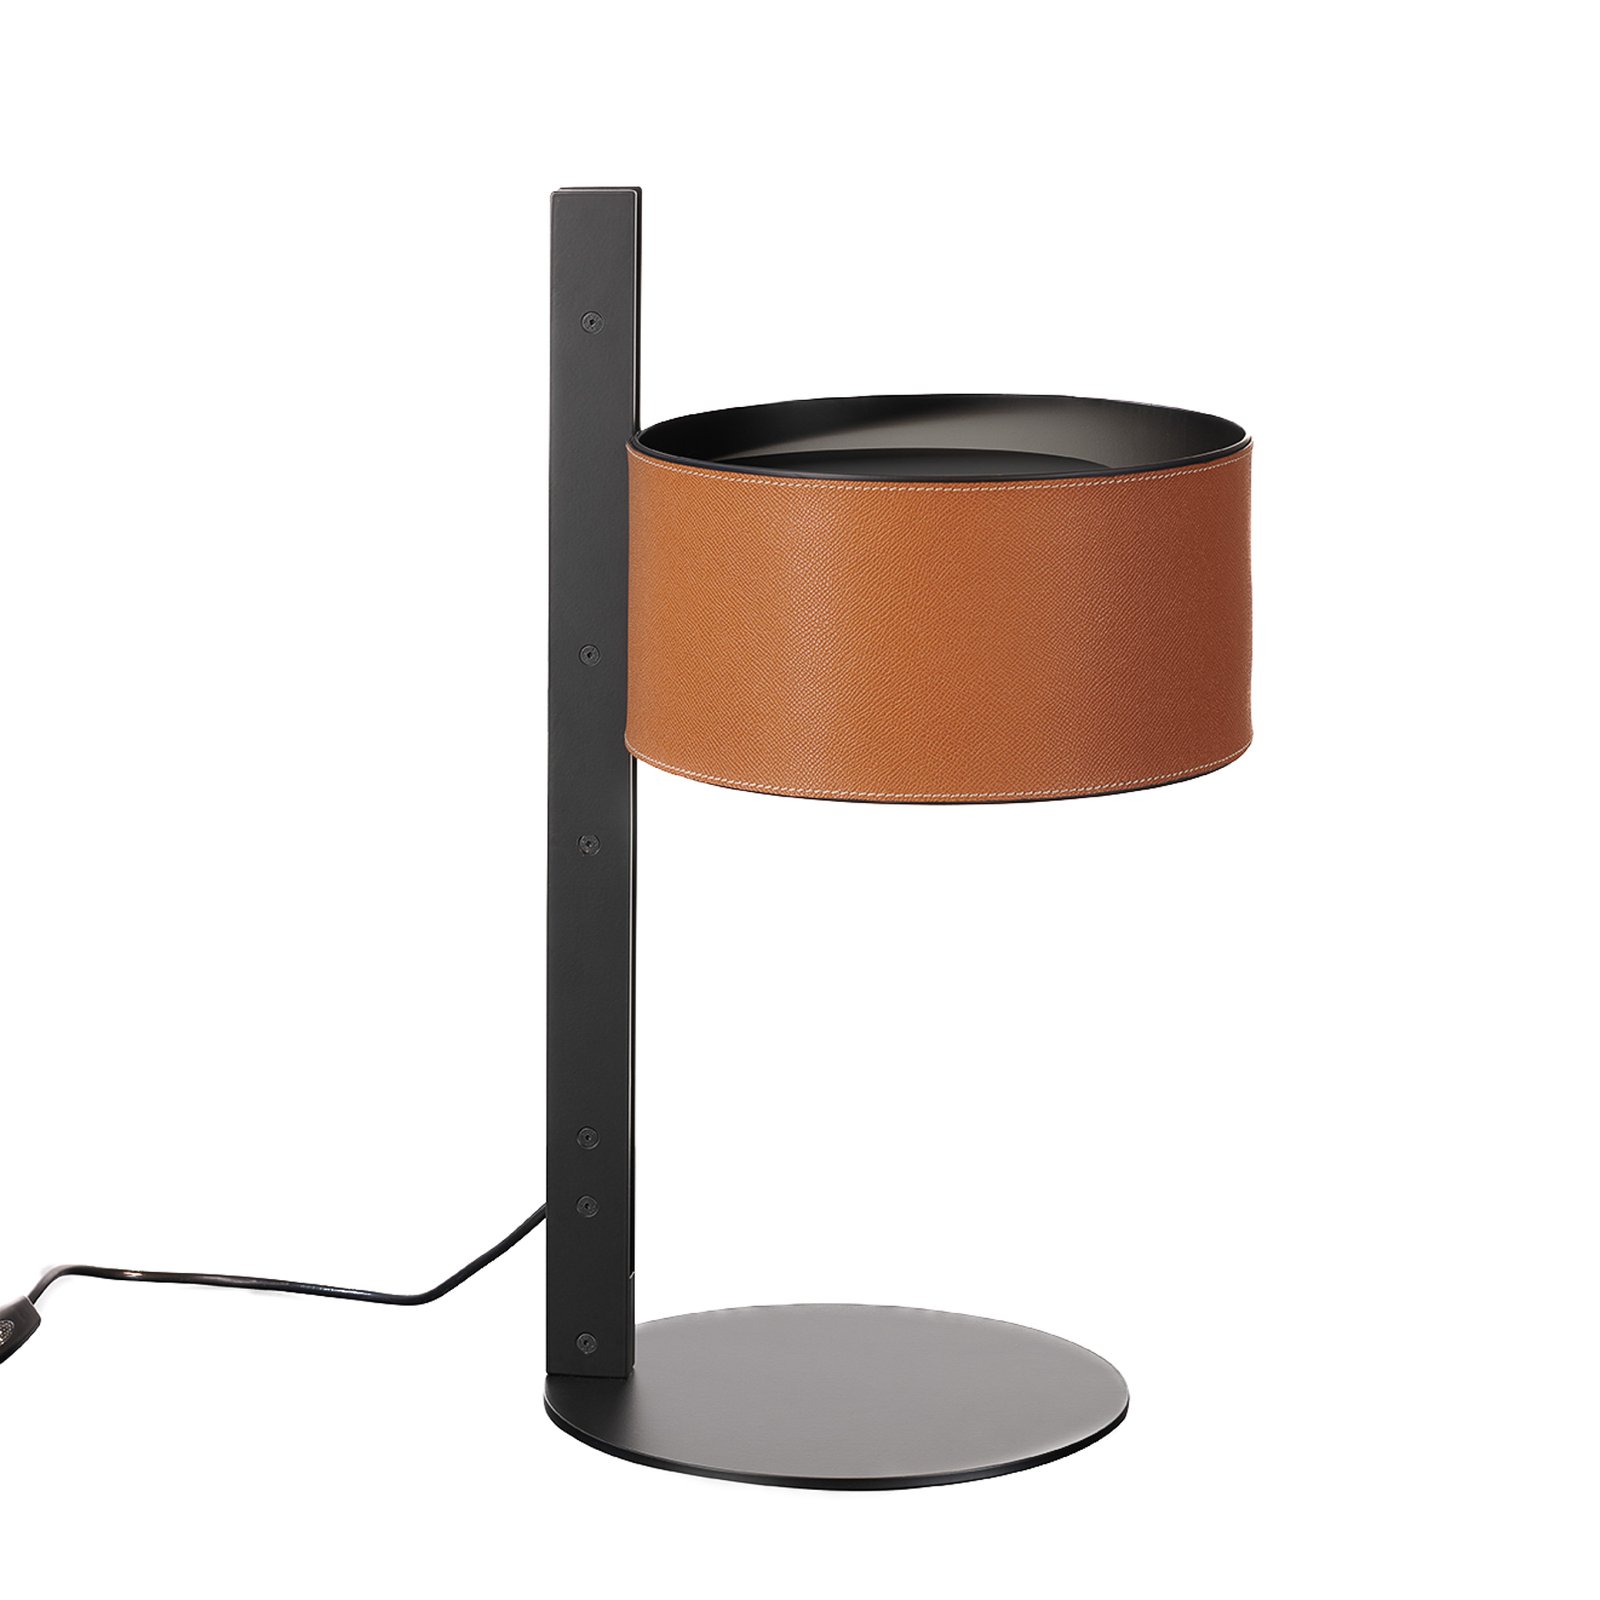 Oluce Parallel 296 table lamp, brown leather